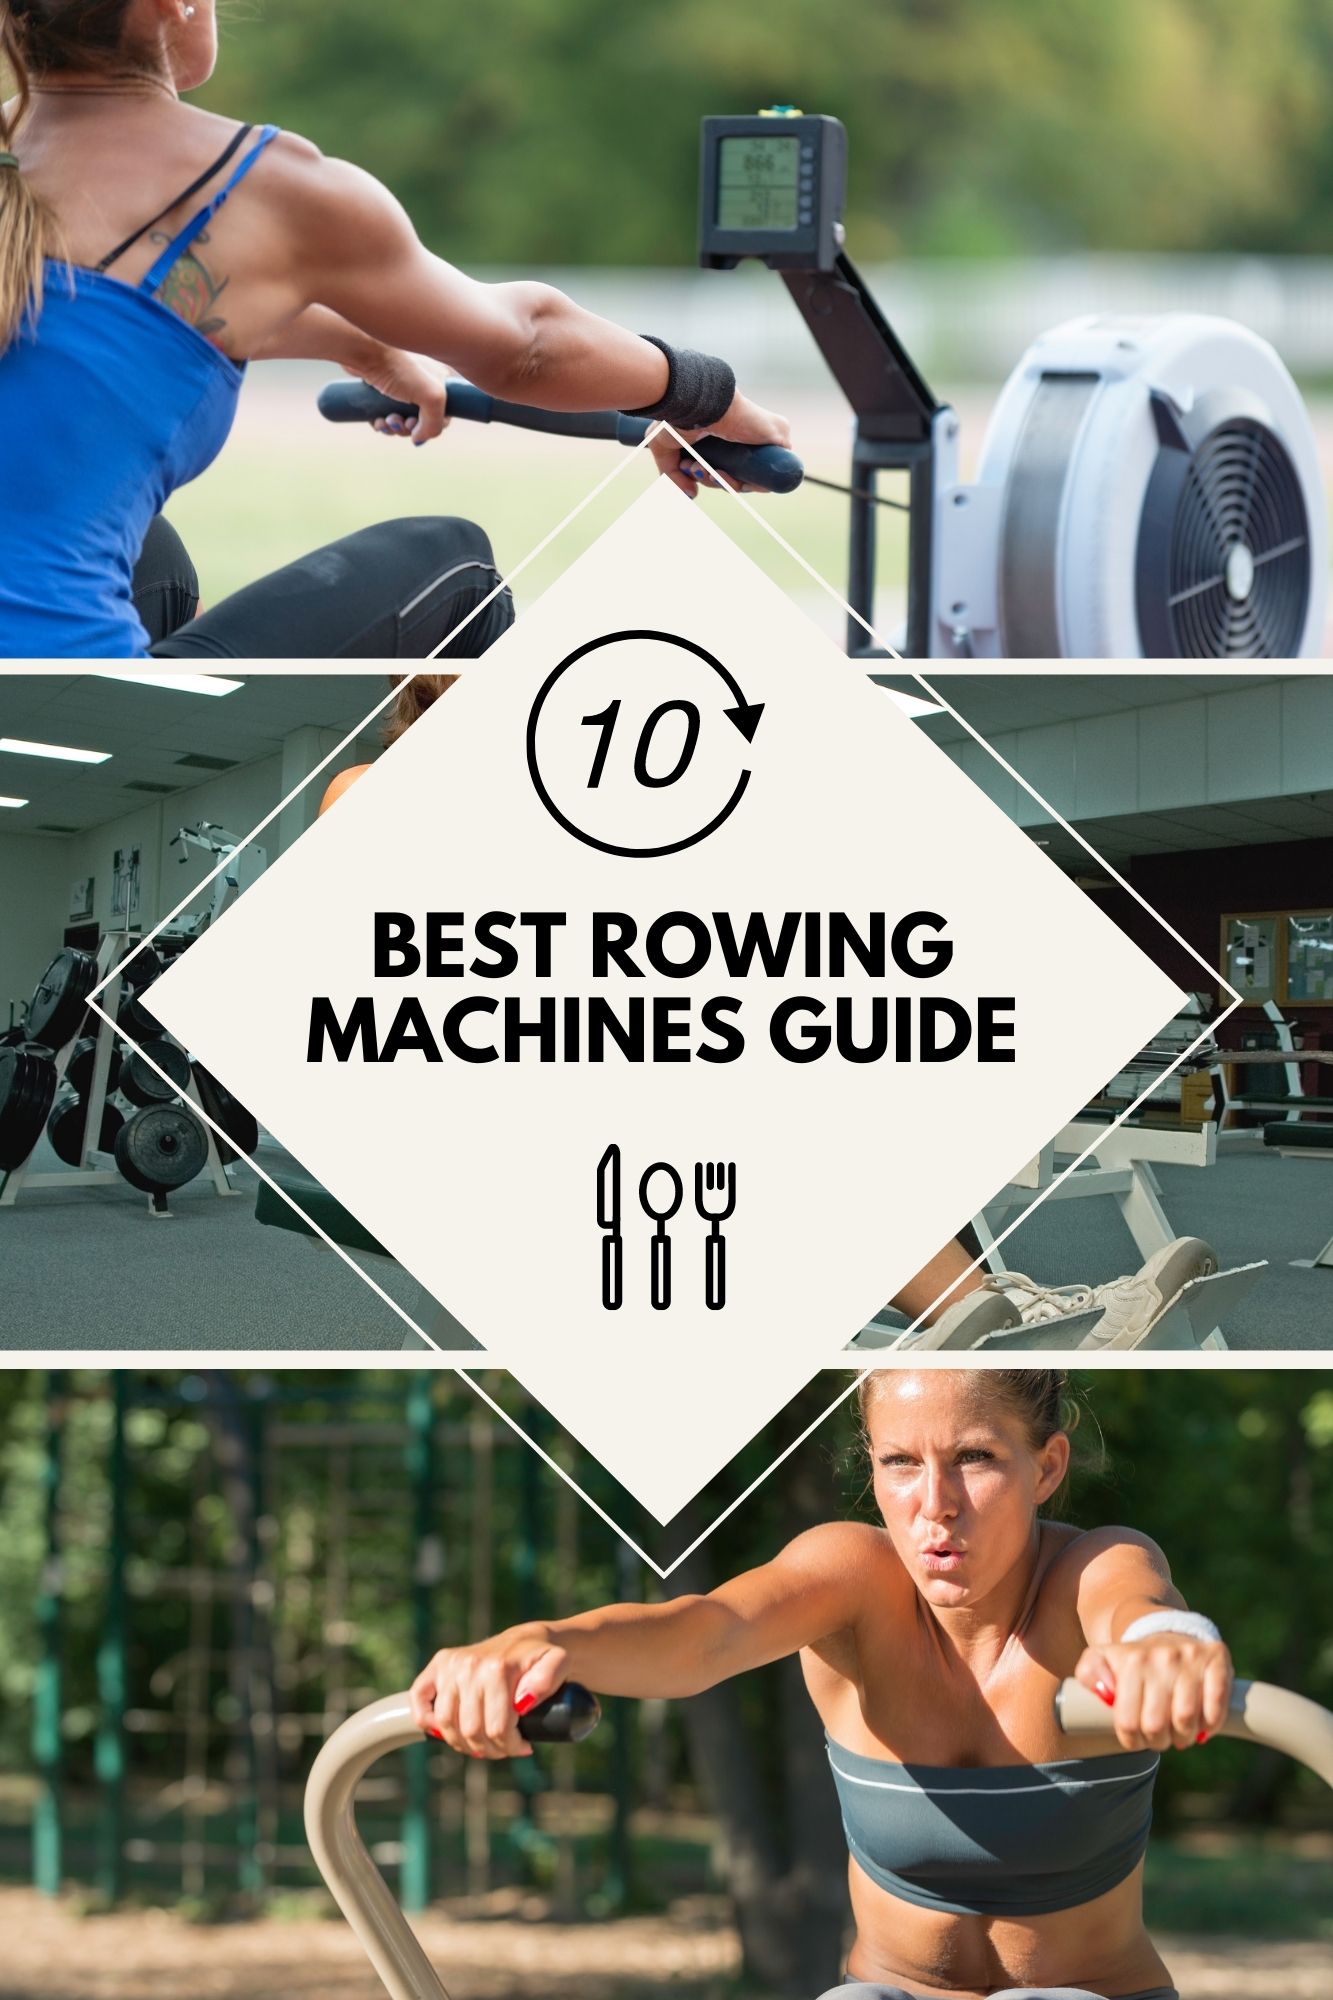 FREE: The 10 Best Rowing Machine Reviews : How To Pick A Ton Of Great Machines by Sumit Joun